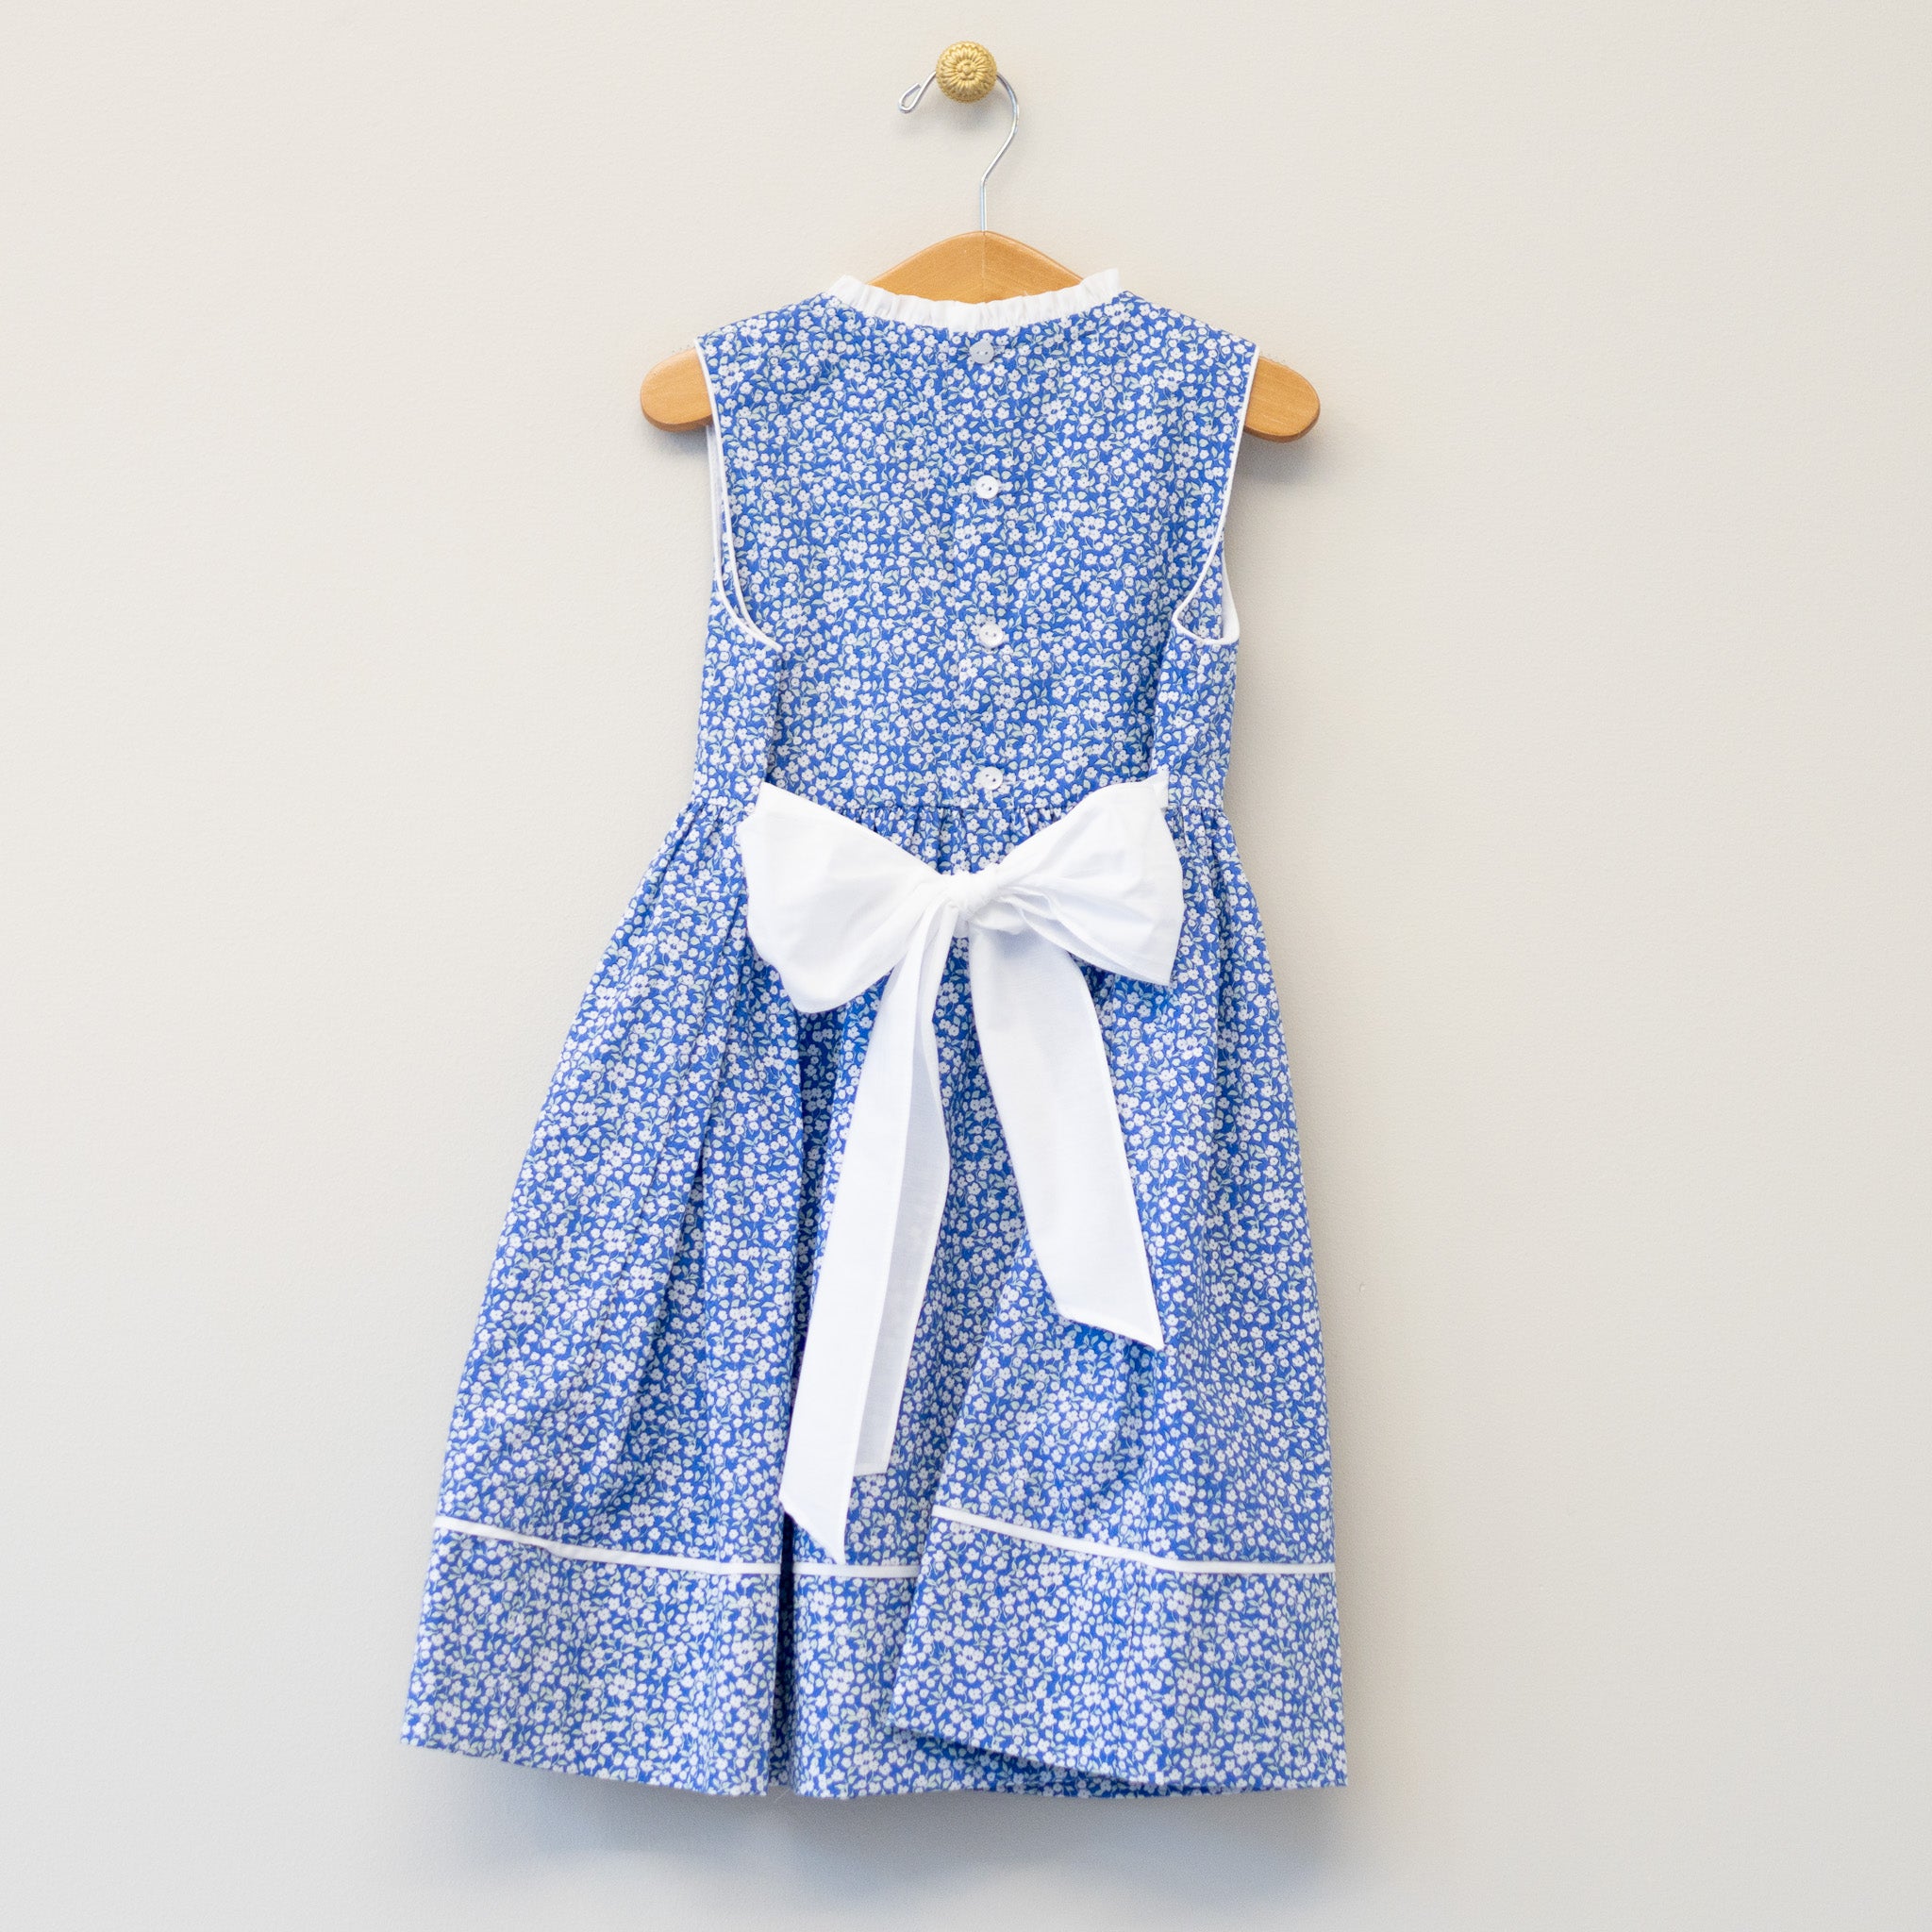 Blue and White Ditsy Print Dress